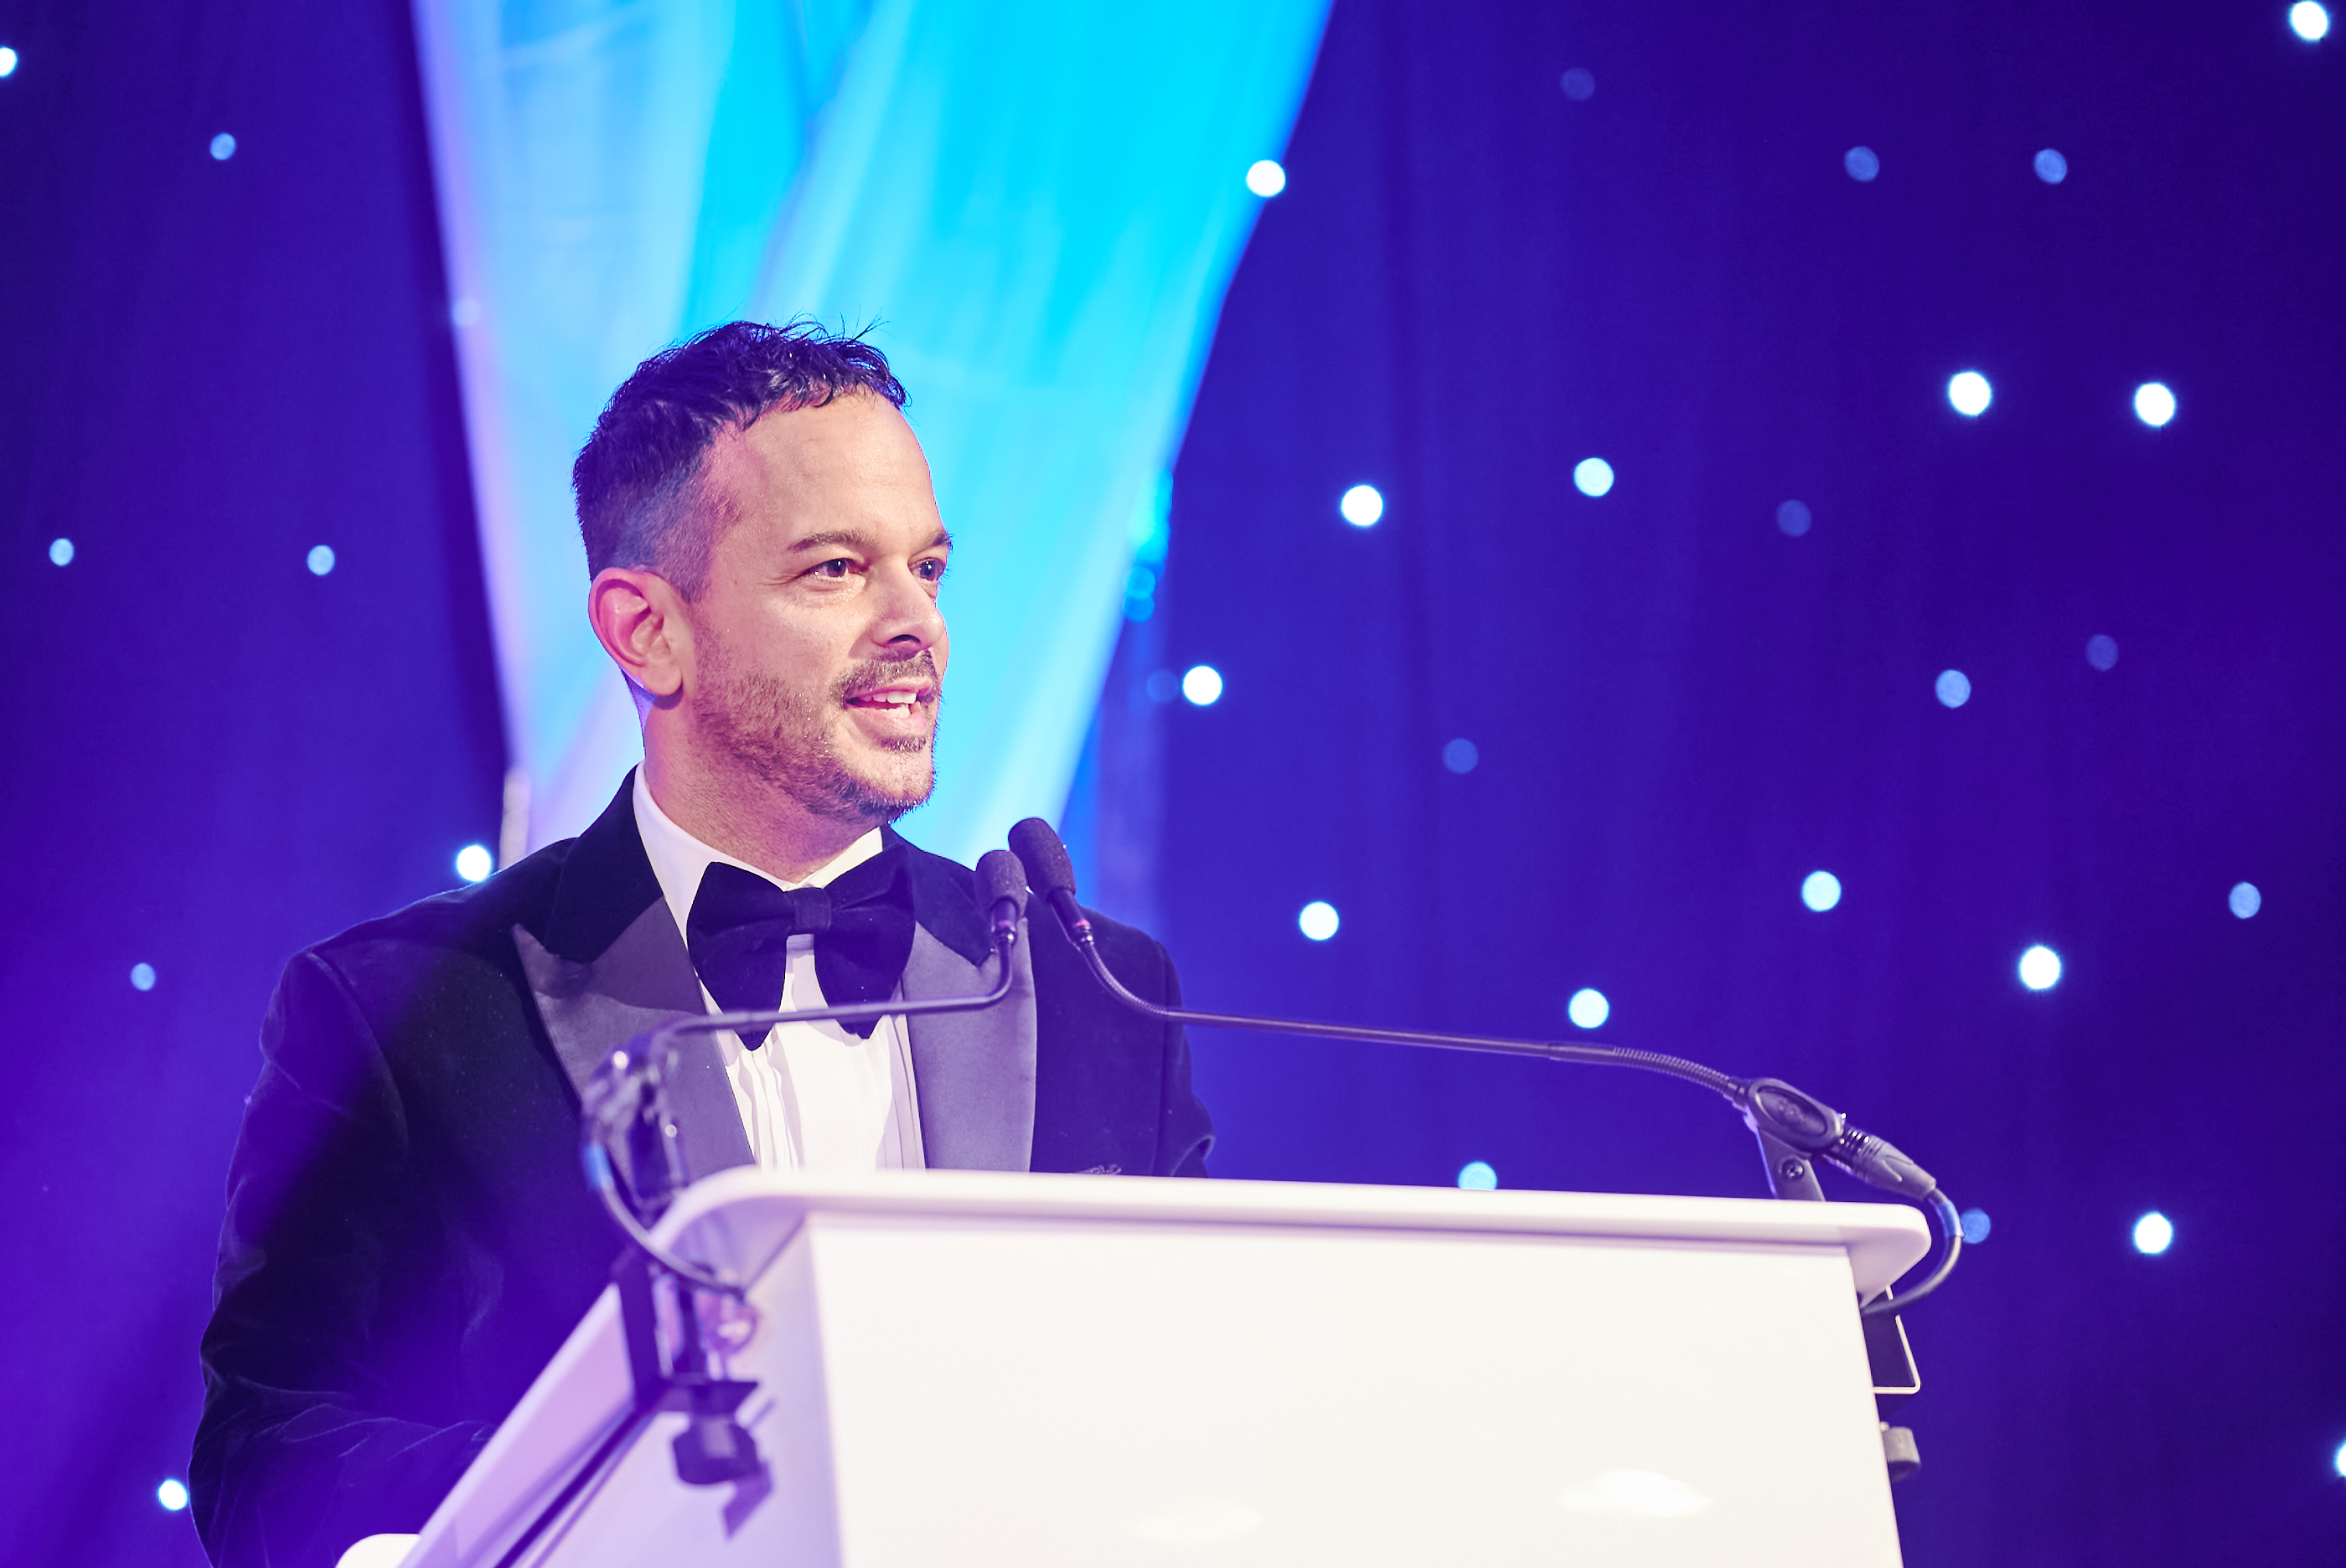 Hector Montalvo of Source Direct Events® Presents Prestigious Award at Industry Gala